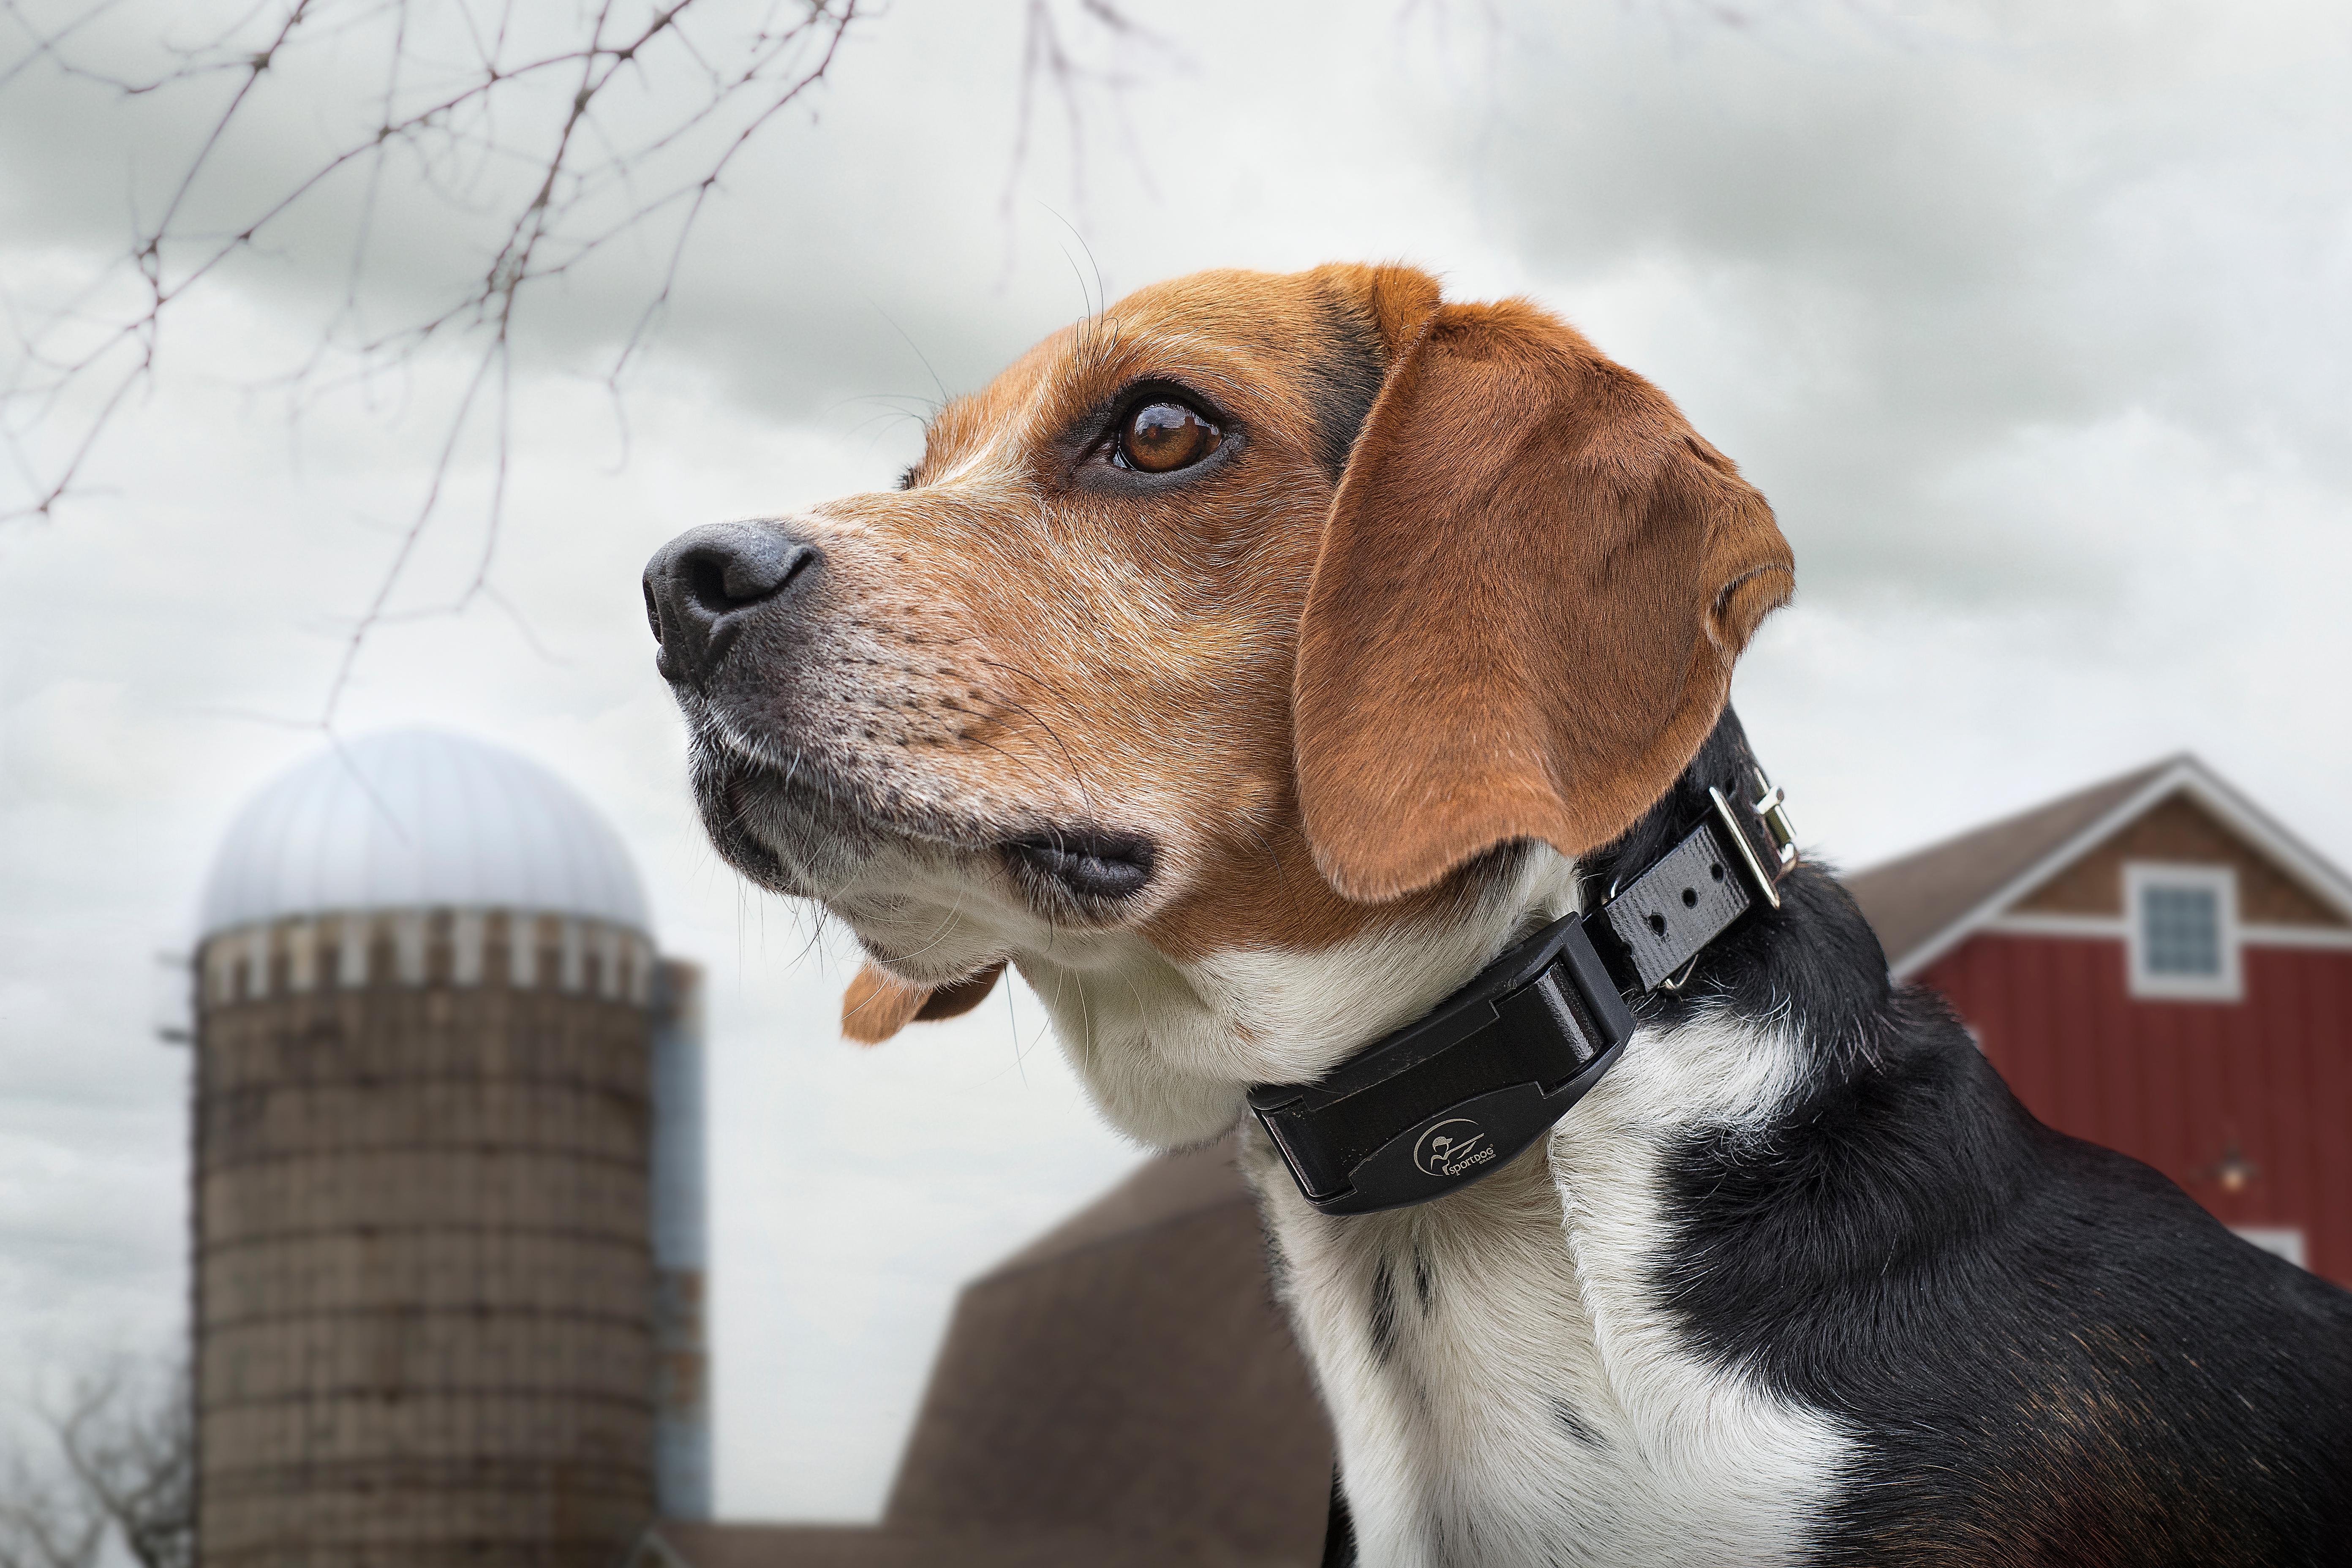 Beagle being quiet while wearing bark collar.